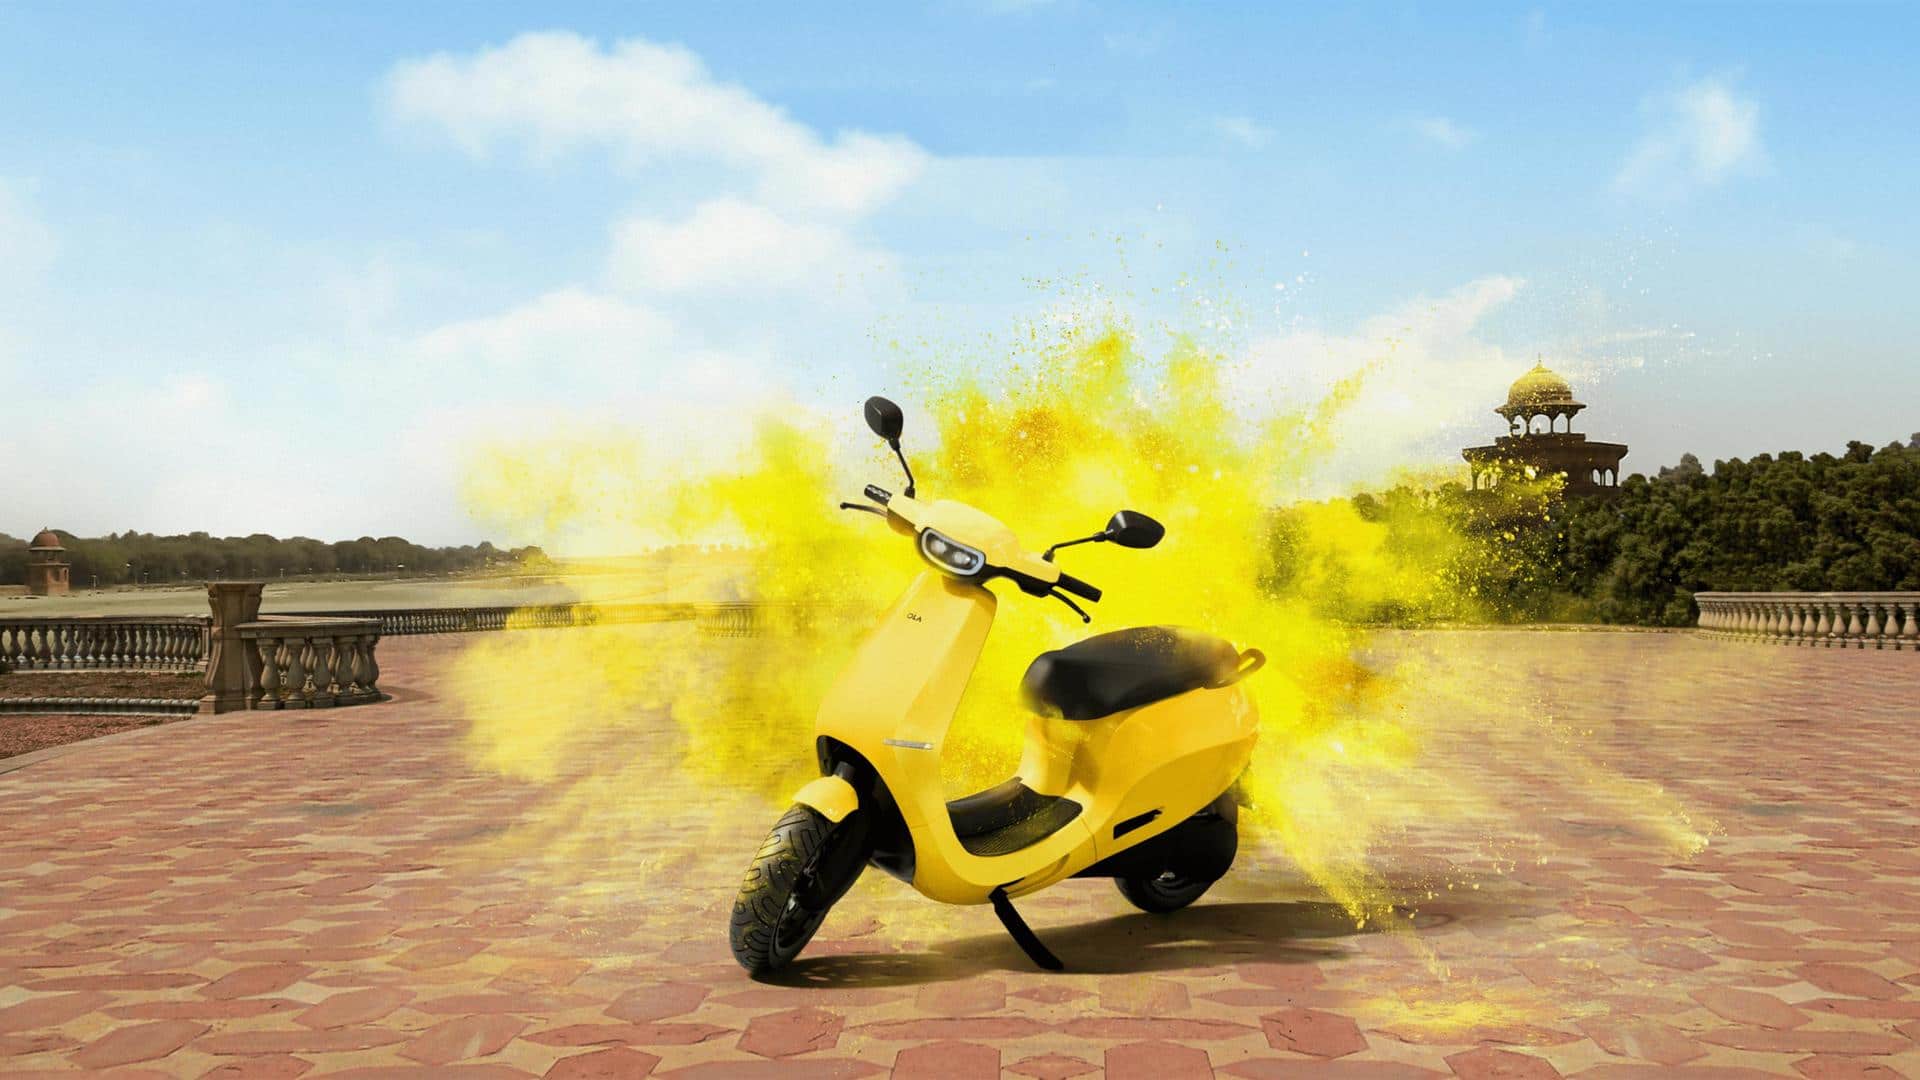 Buying Ola S1 EV this Holi? Check the latest offers